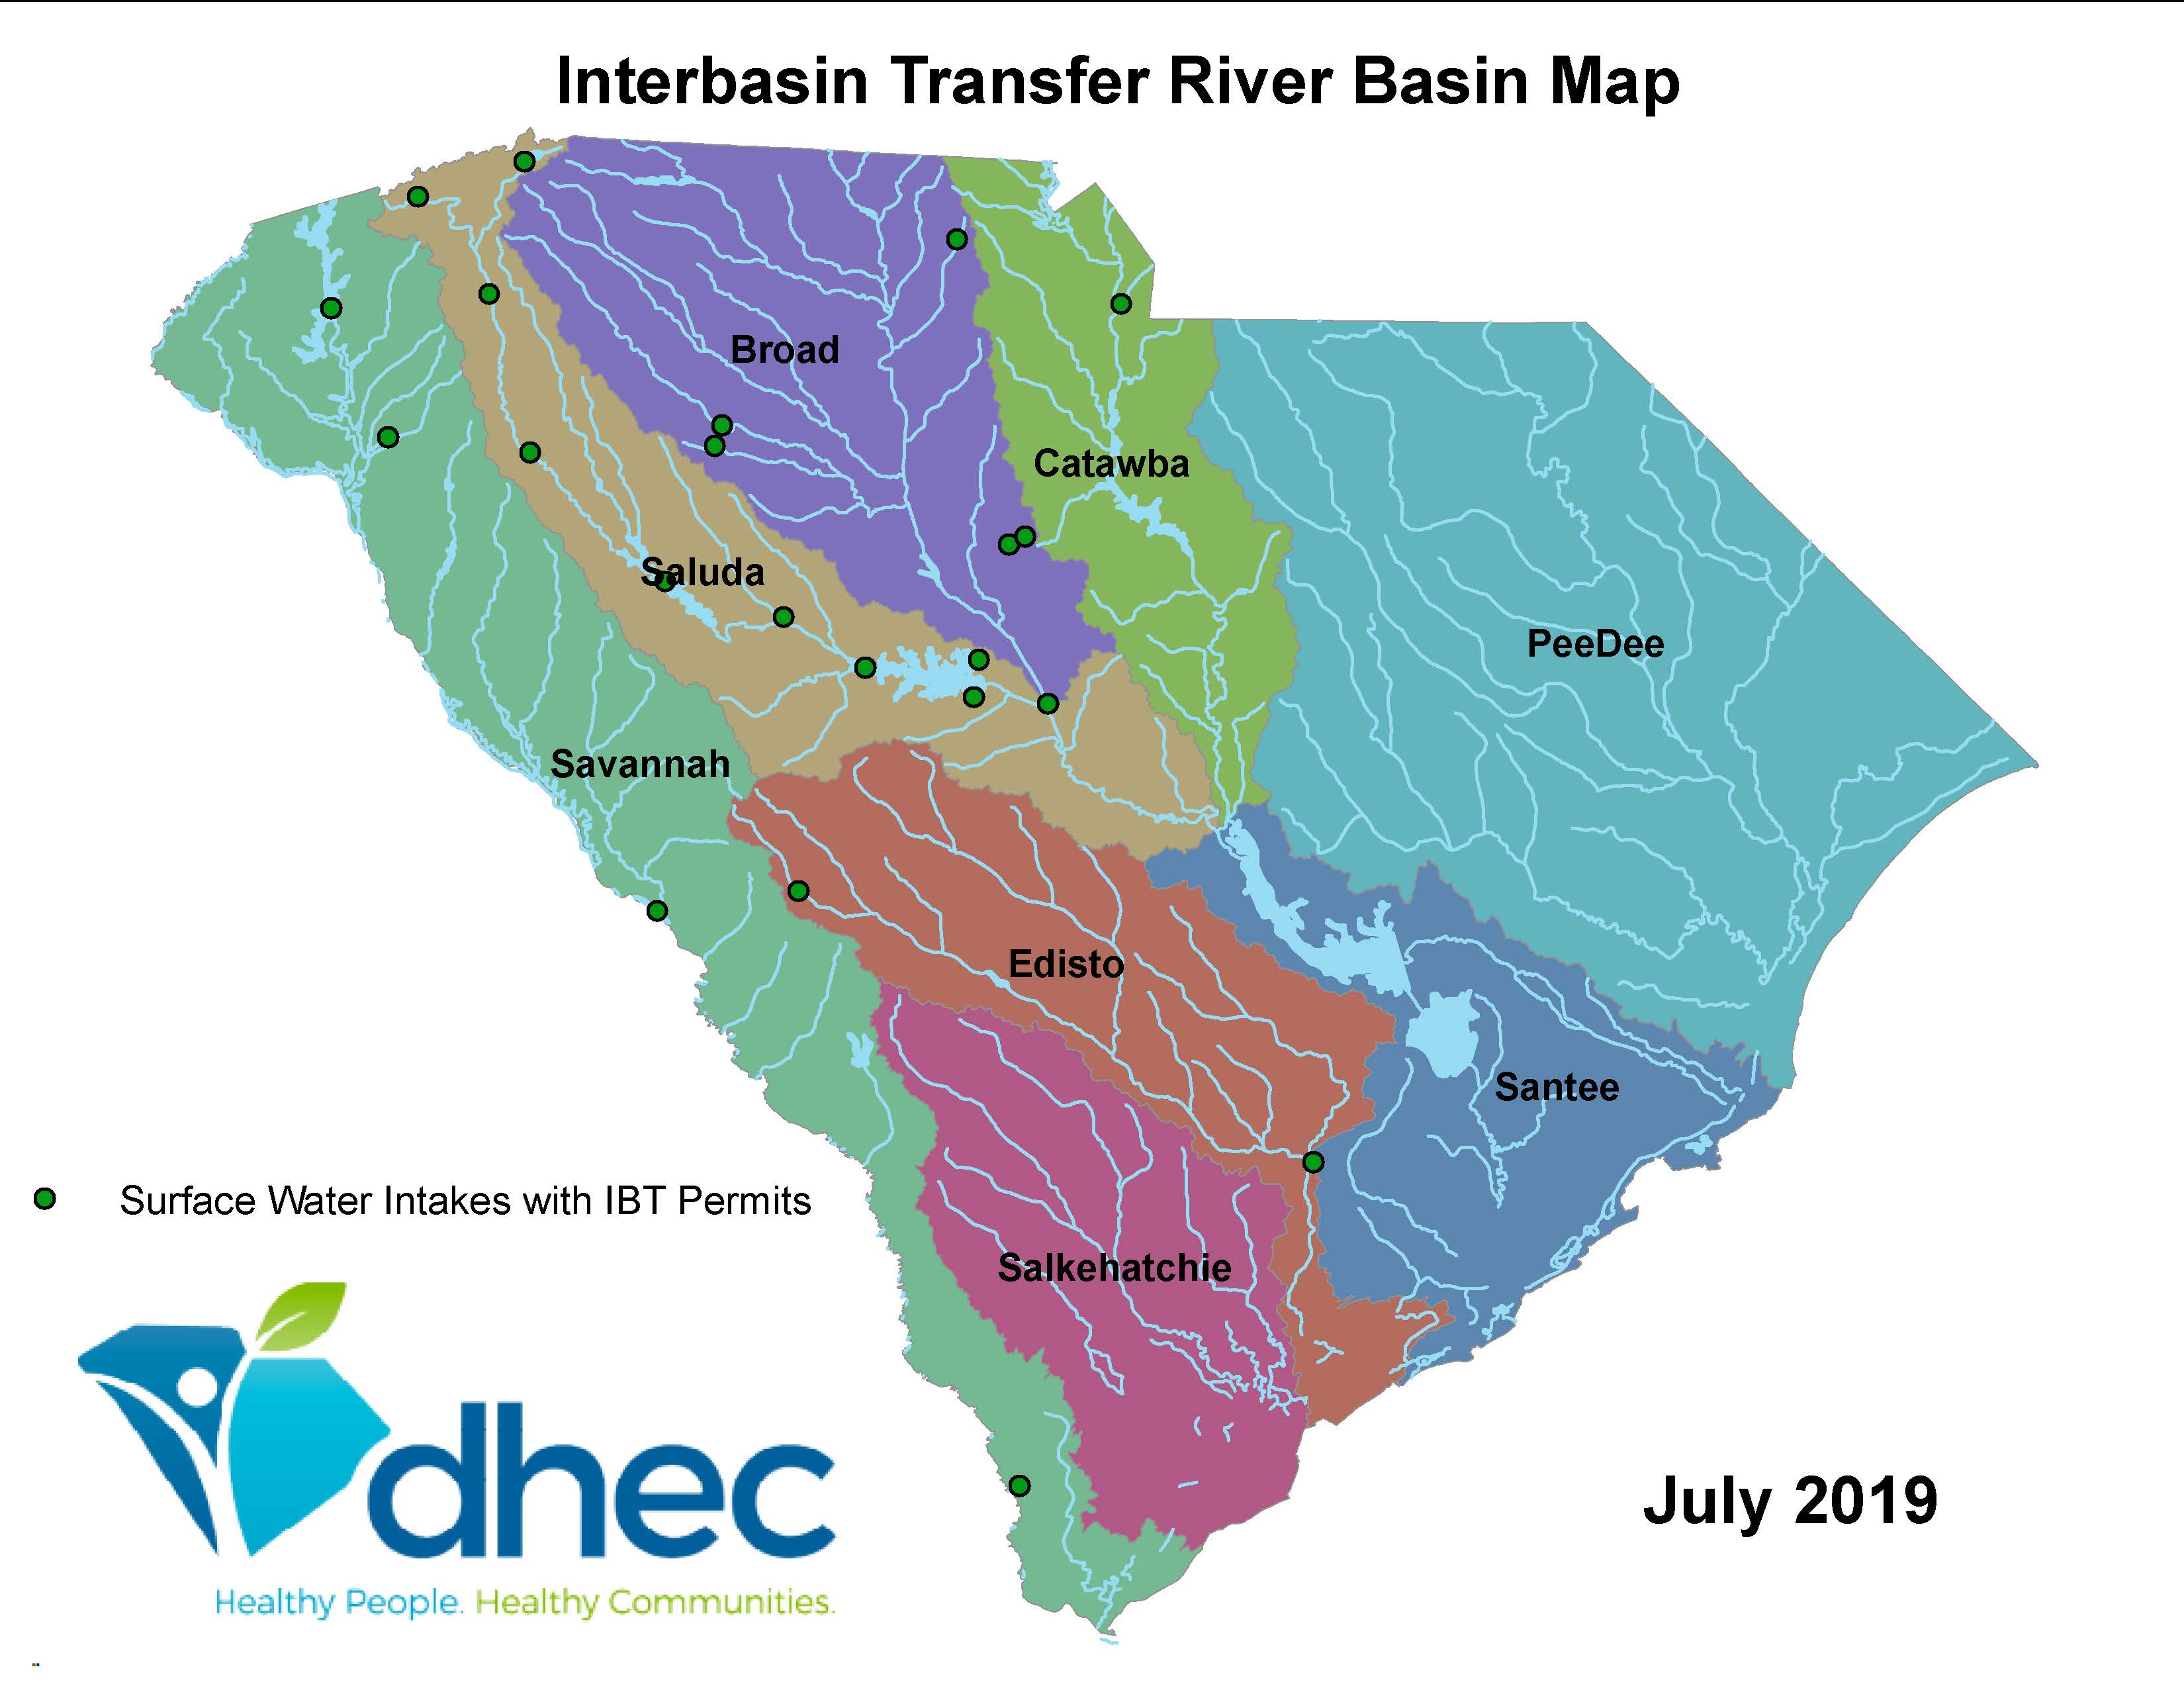 The following map of South Carolina illustrates the 8 major river basins of the state and the locations of surface water intakes are located for interbasin transfers or IBT. 